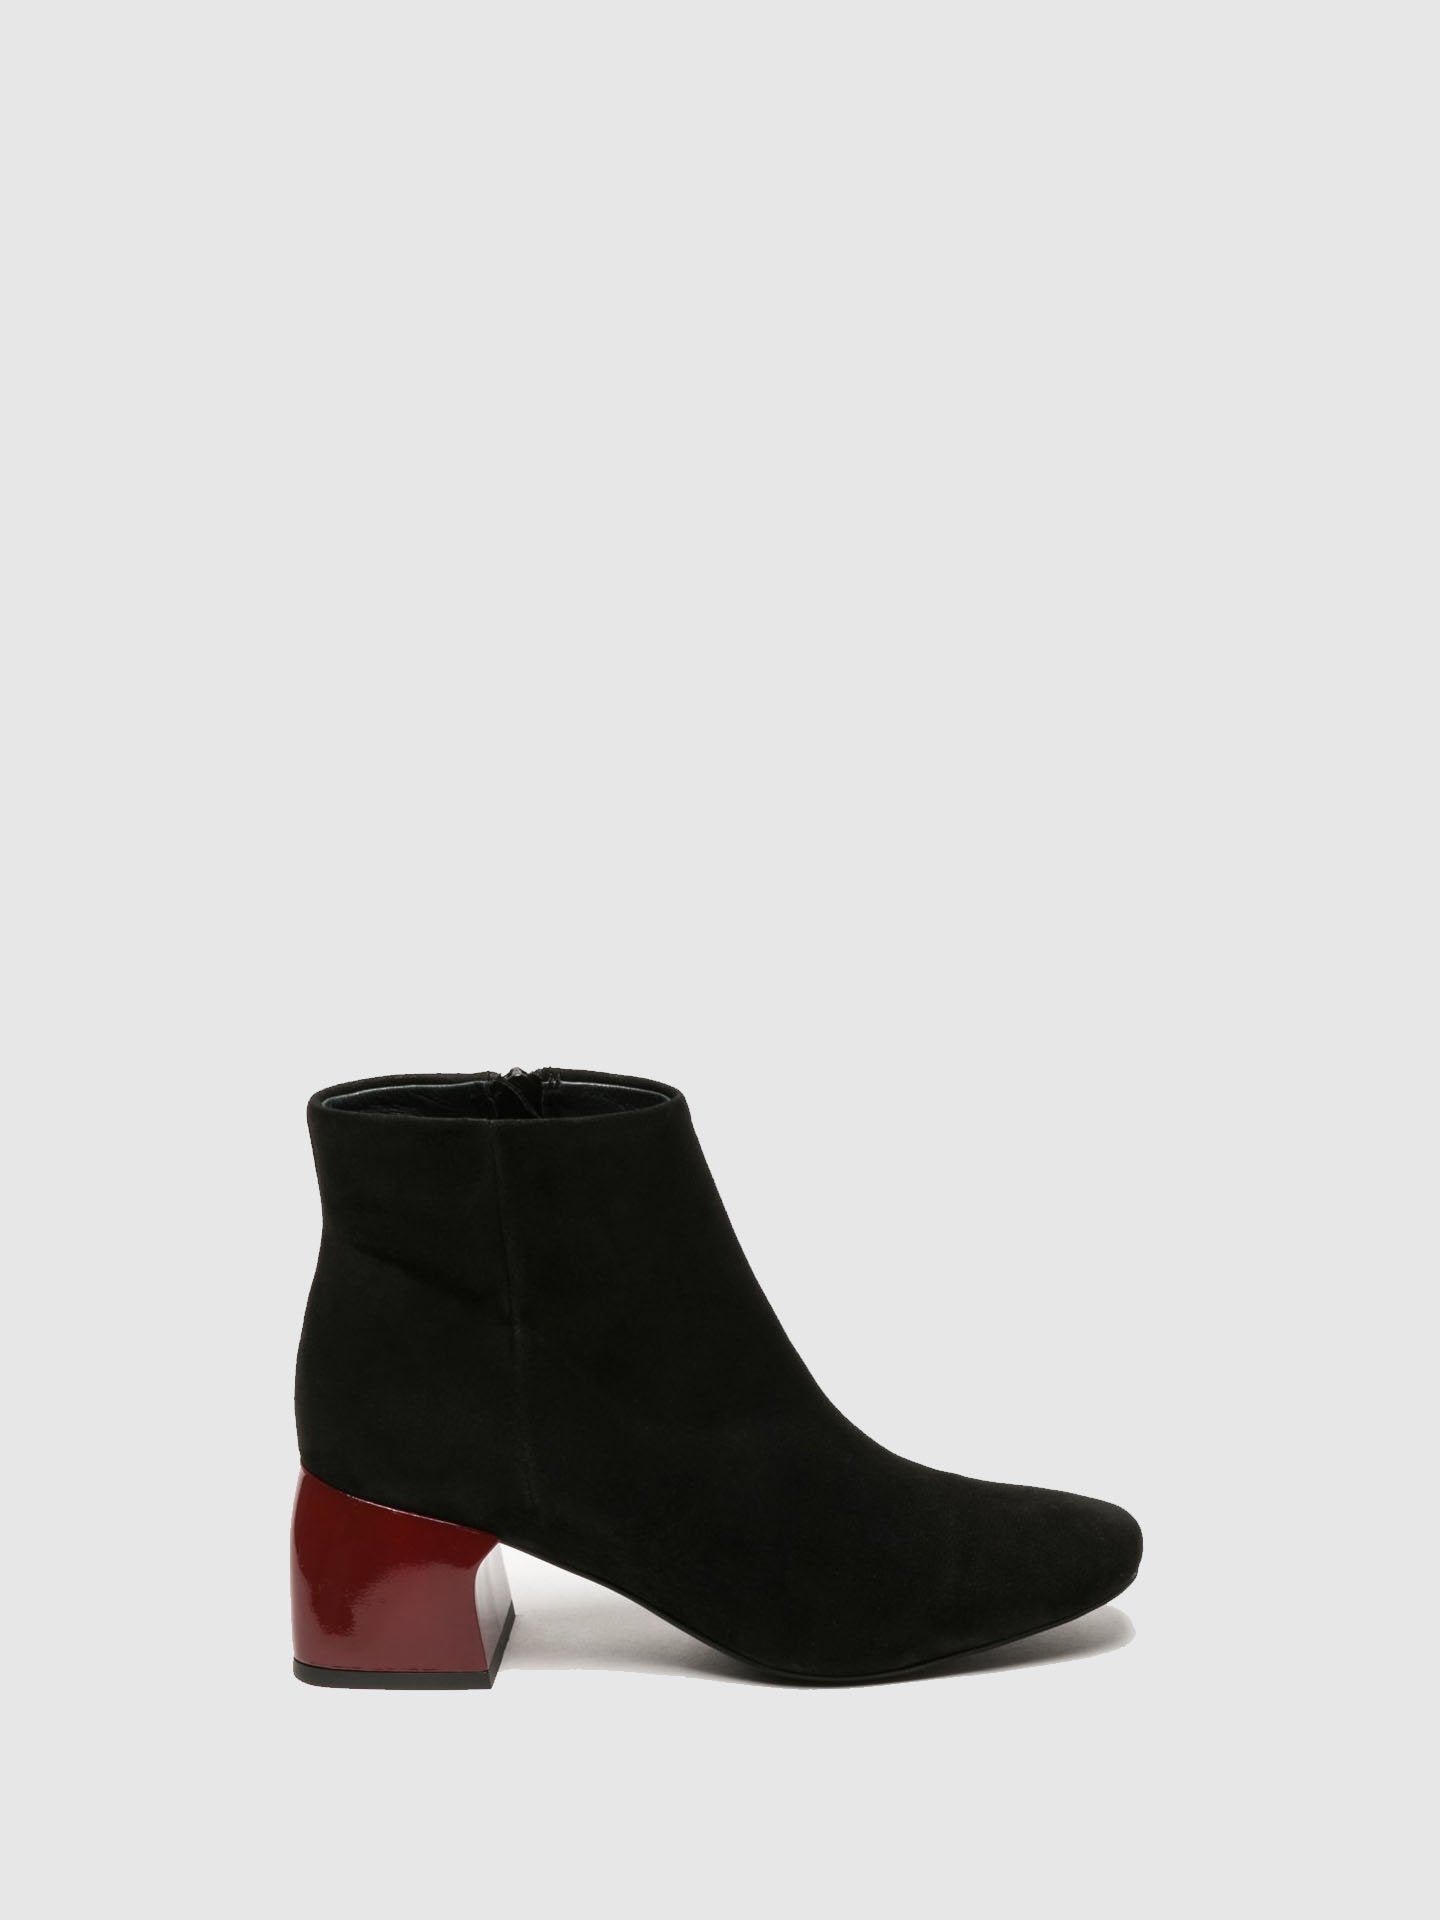 Foreva Black Zip Up Ankle Boots